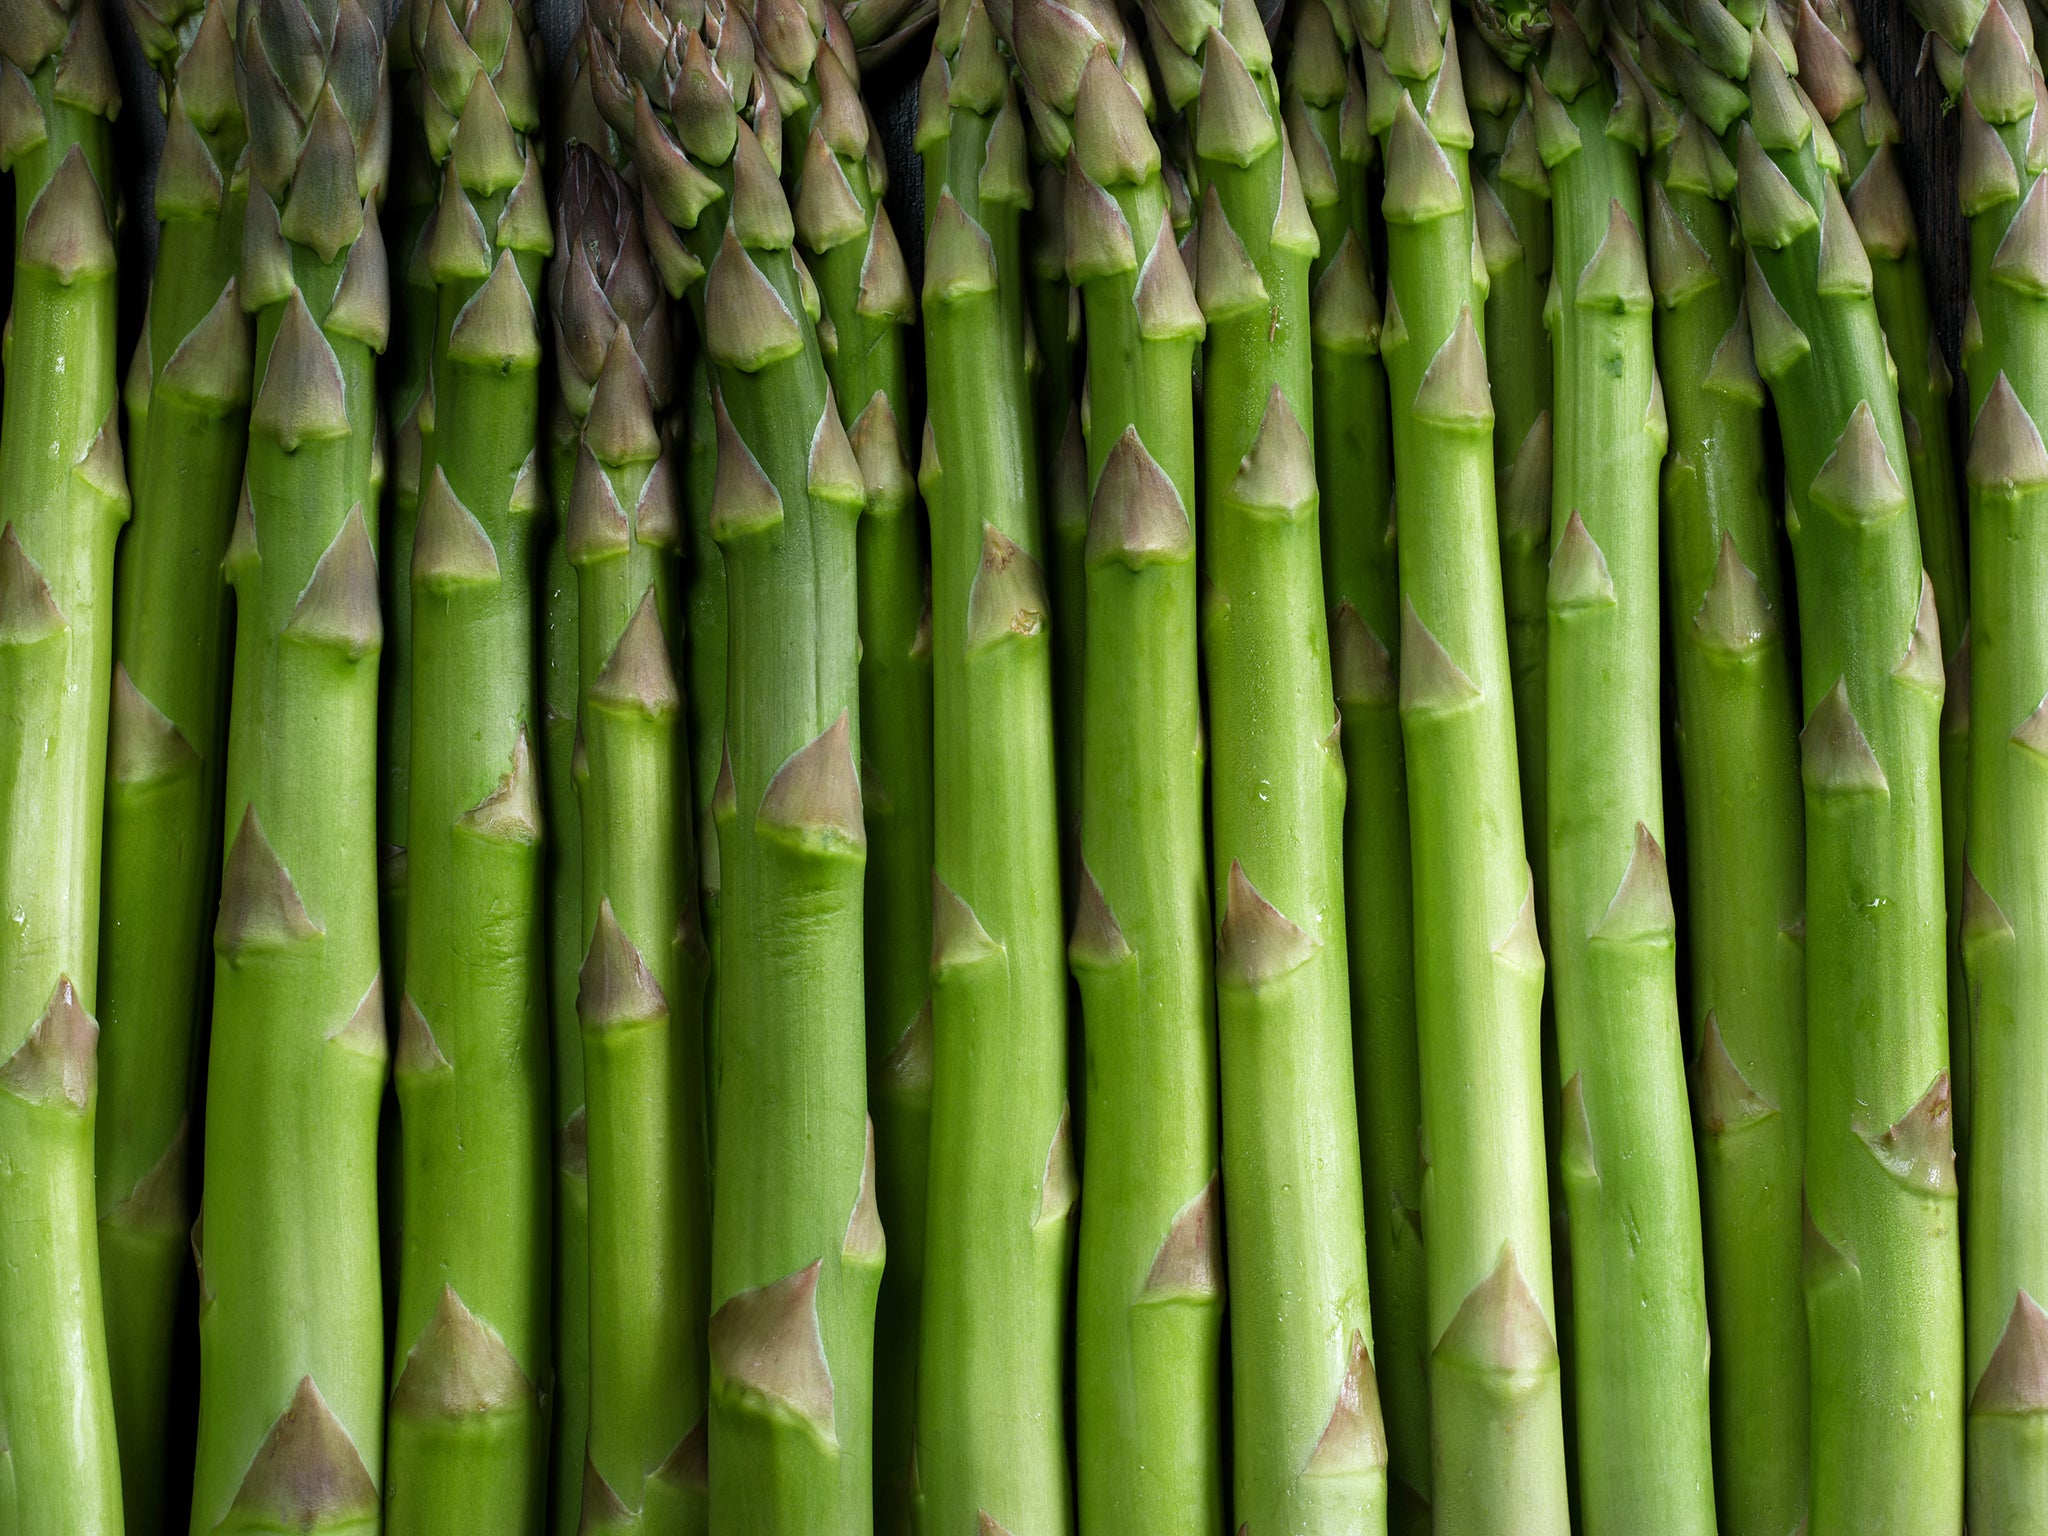 Asparagus season Recipes from top British chefs The Independent